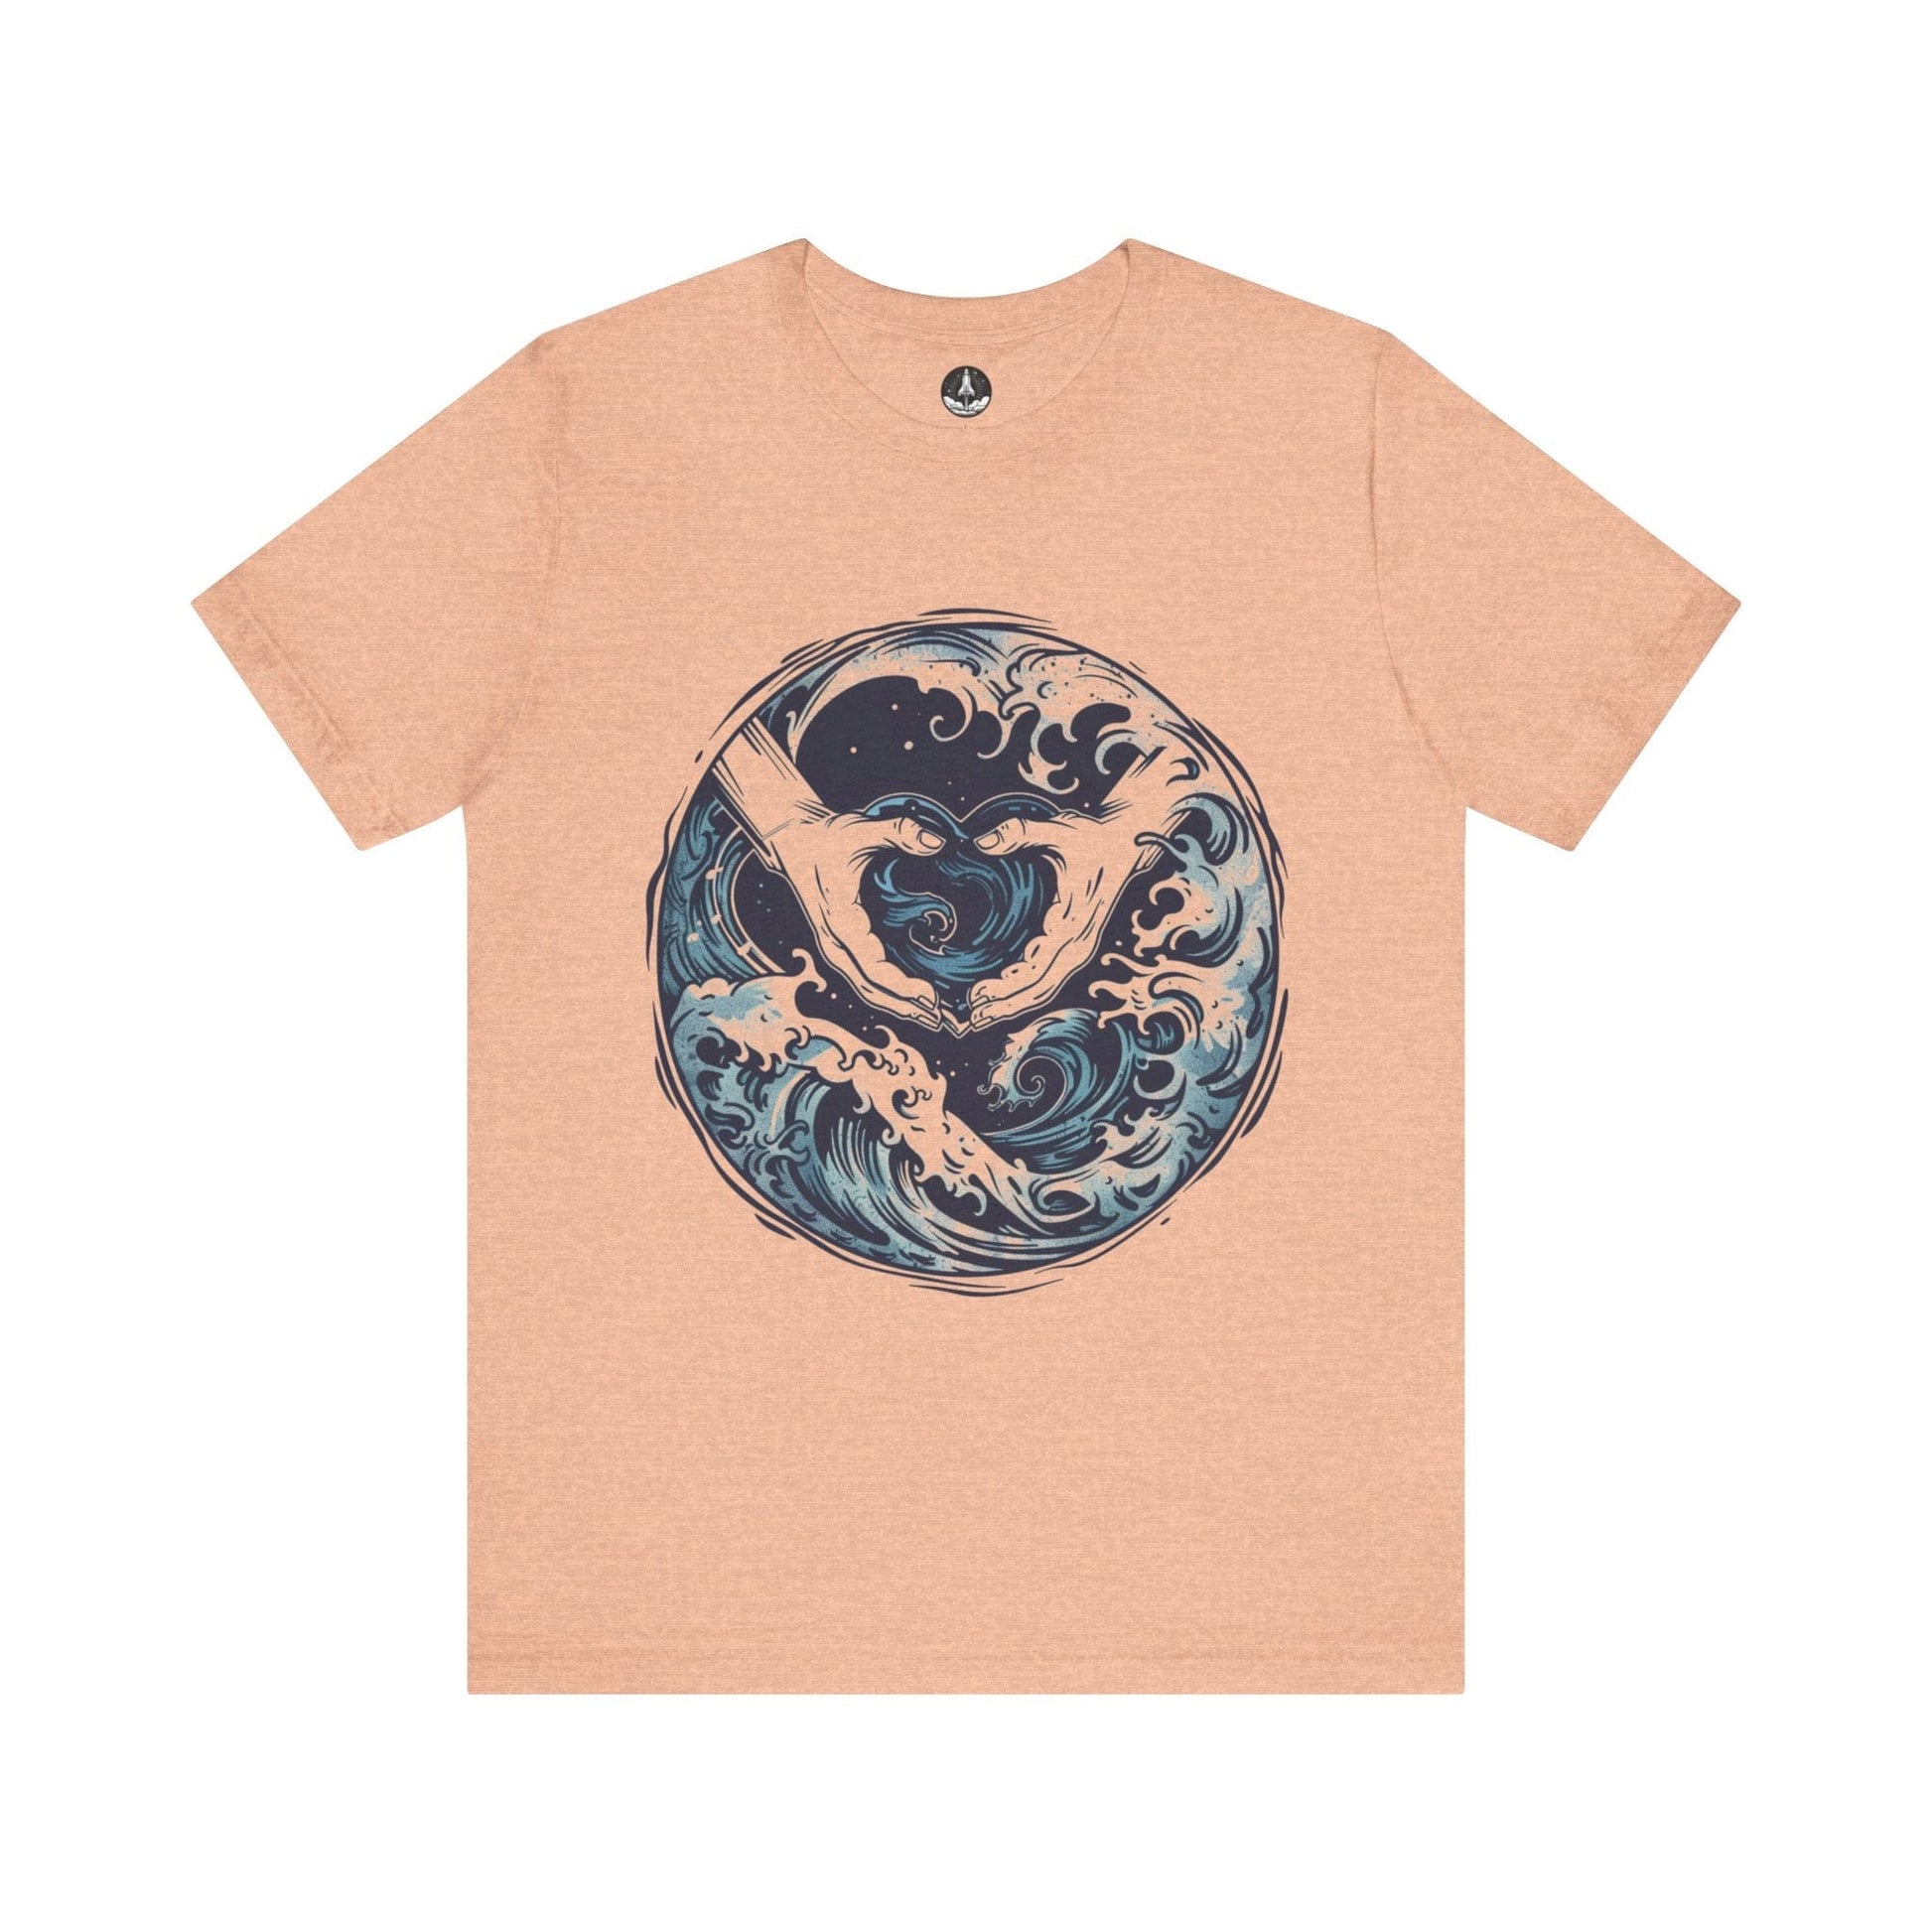 T-Shirt Heather Peach / S Aquarian Currents TShirts: Embrace the Flow